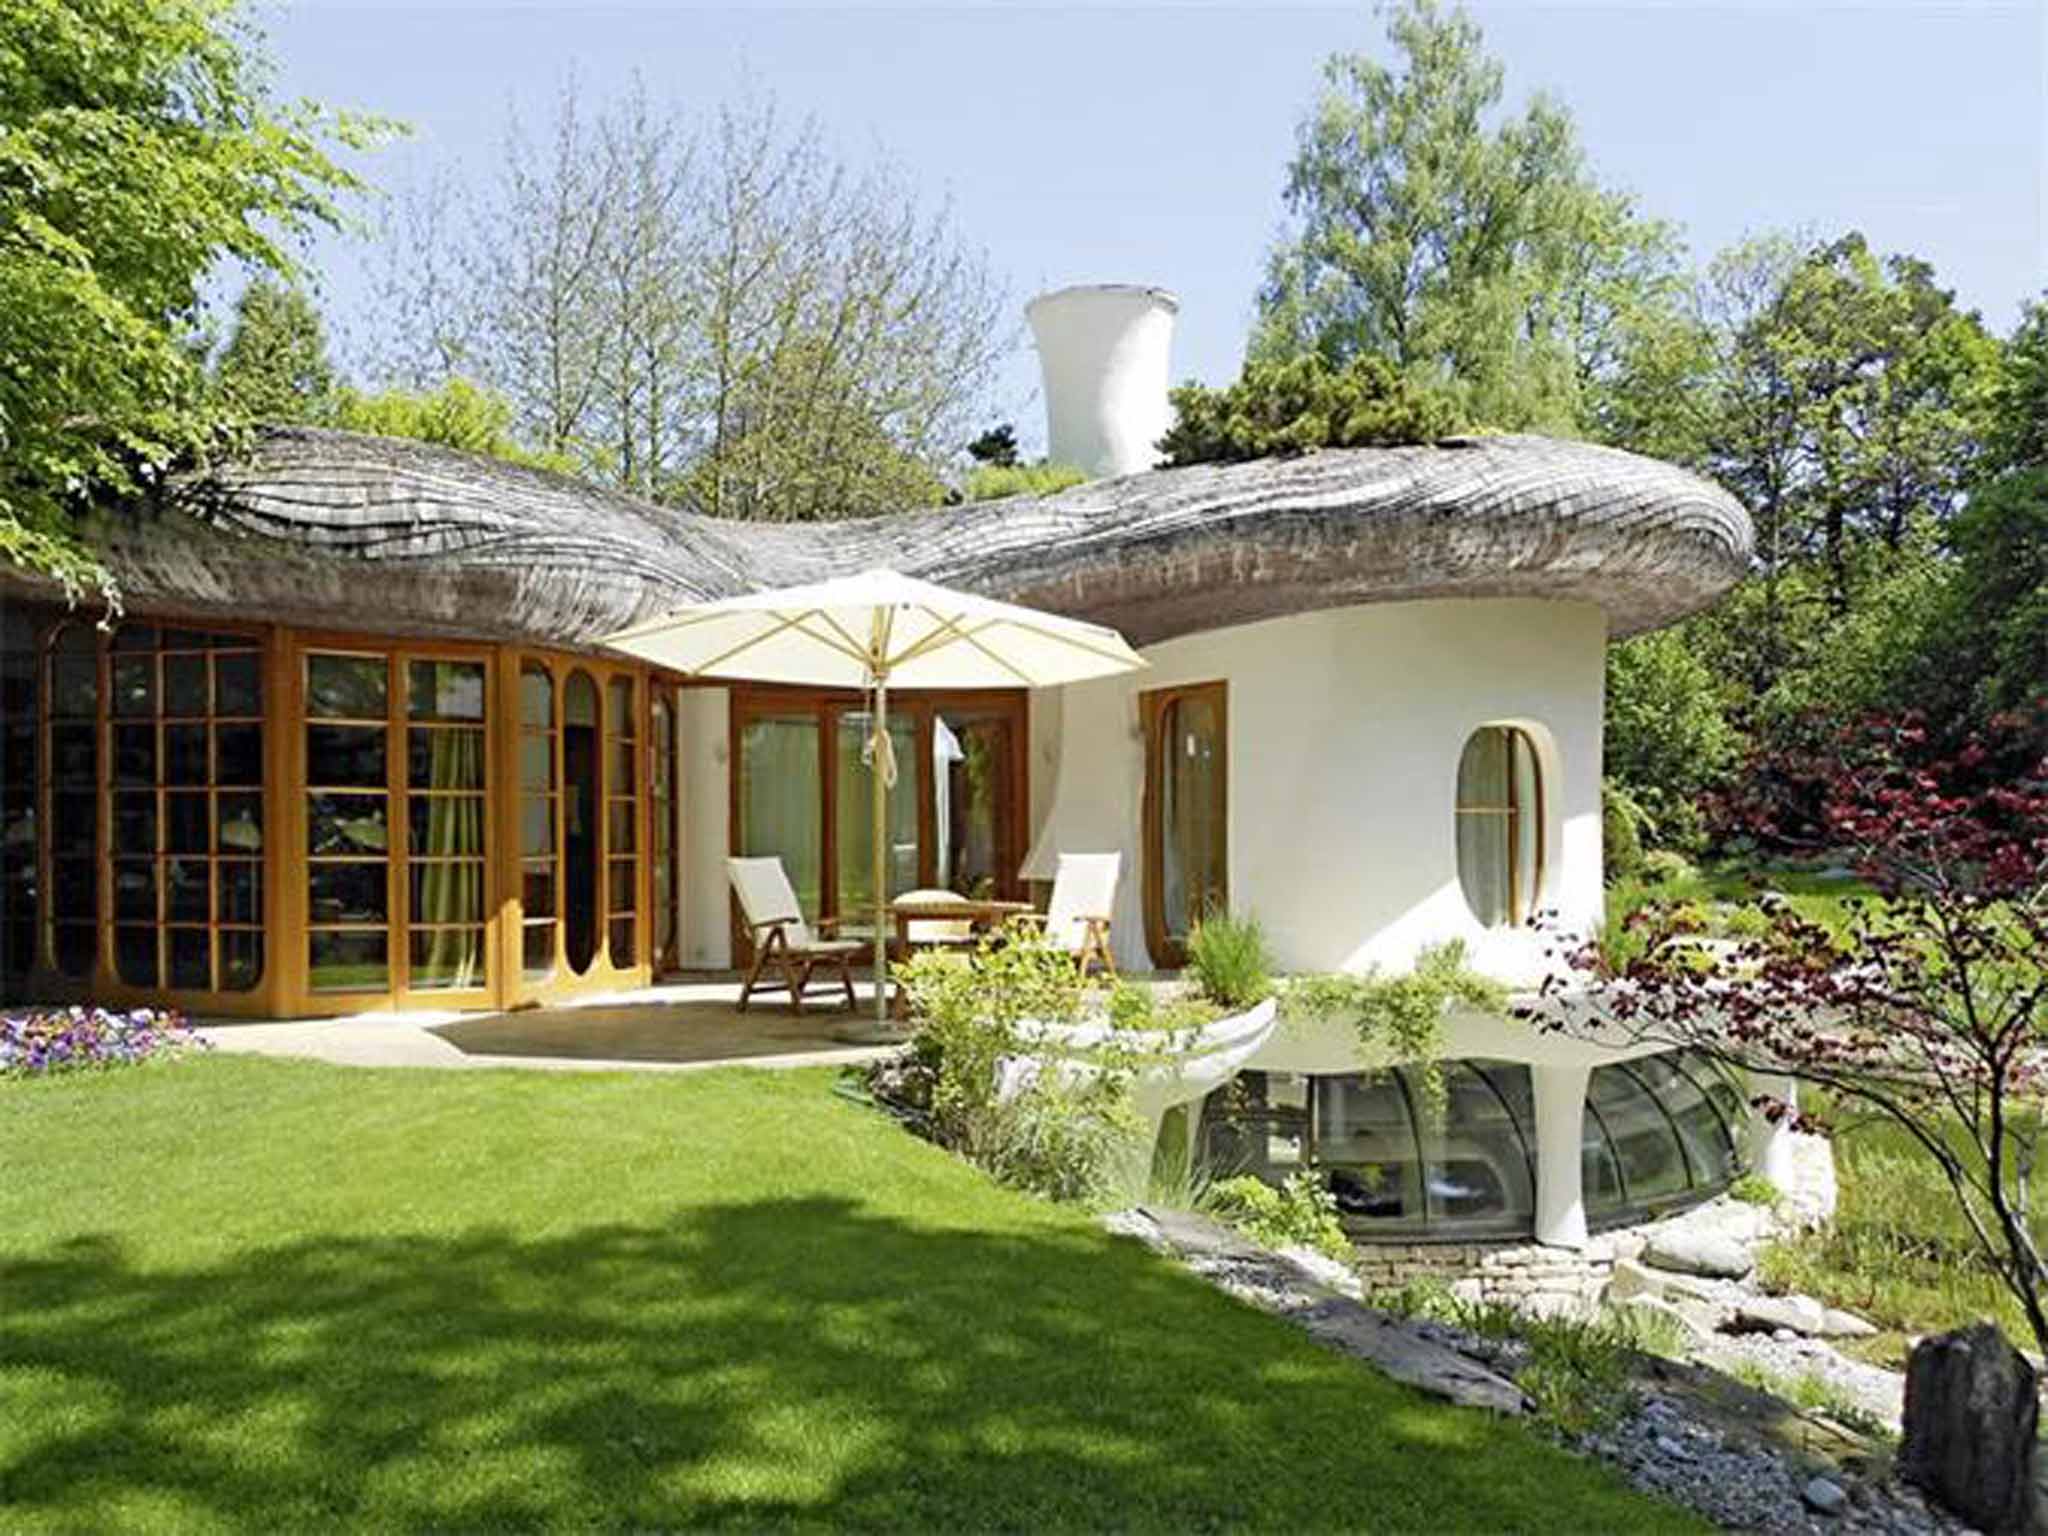 5. OLYMPISTADION, MUNICH PRICE: 18.500.000 EUROS DISTANCE: Approx. 19km Inspired by traditional Sardinian round houses, this designer villa spans almost 9,000 sq ft in more than three quarters of an acre. Its 22 r